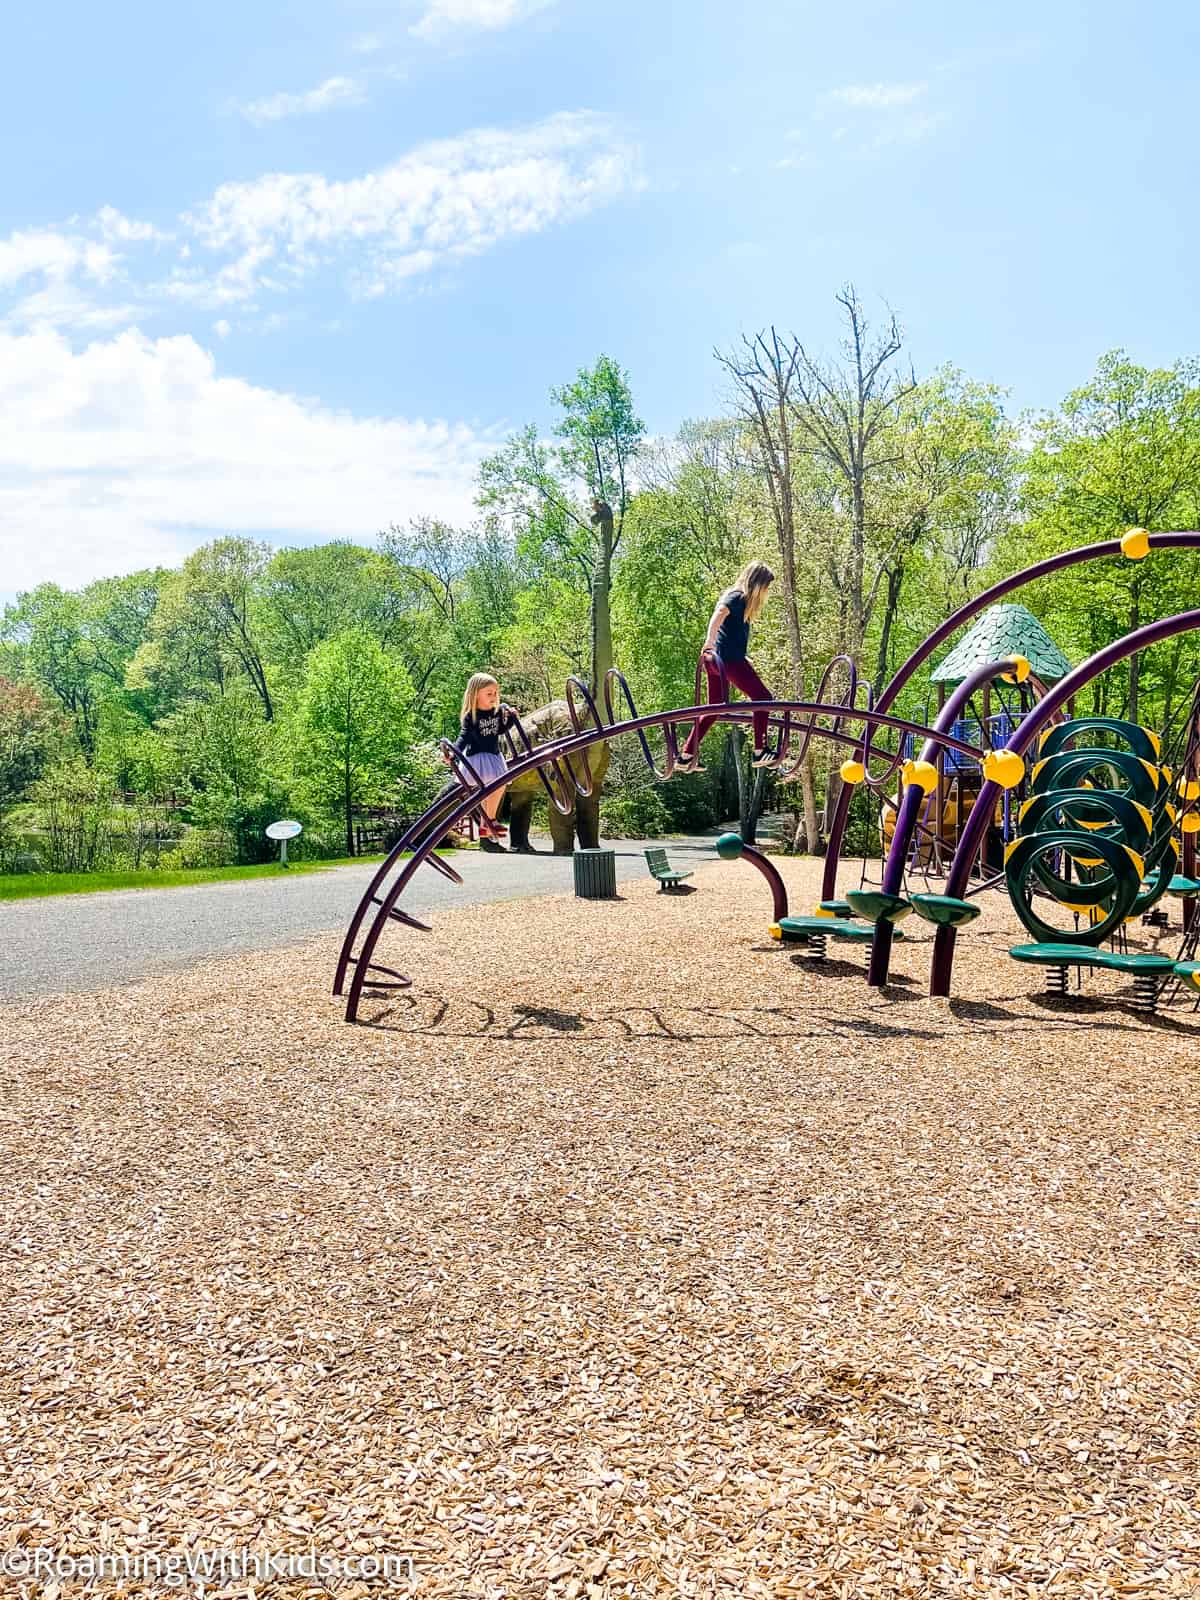 Playground at The Dinosaur Place in Connecticut